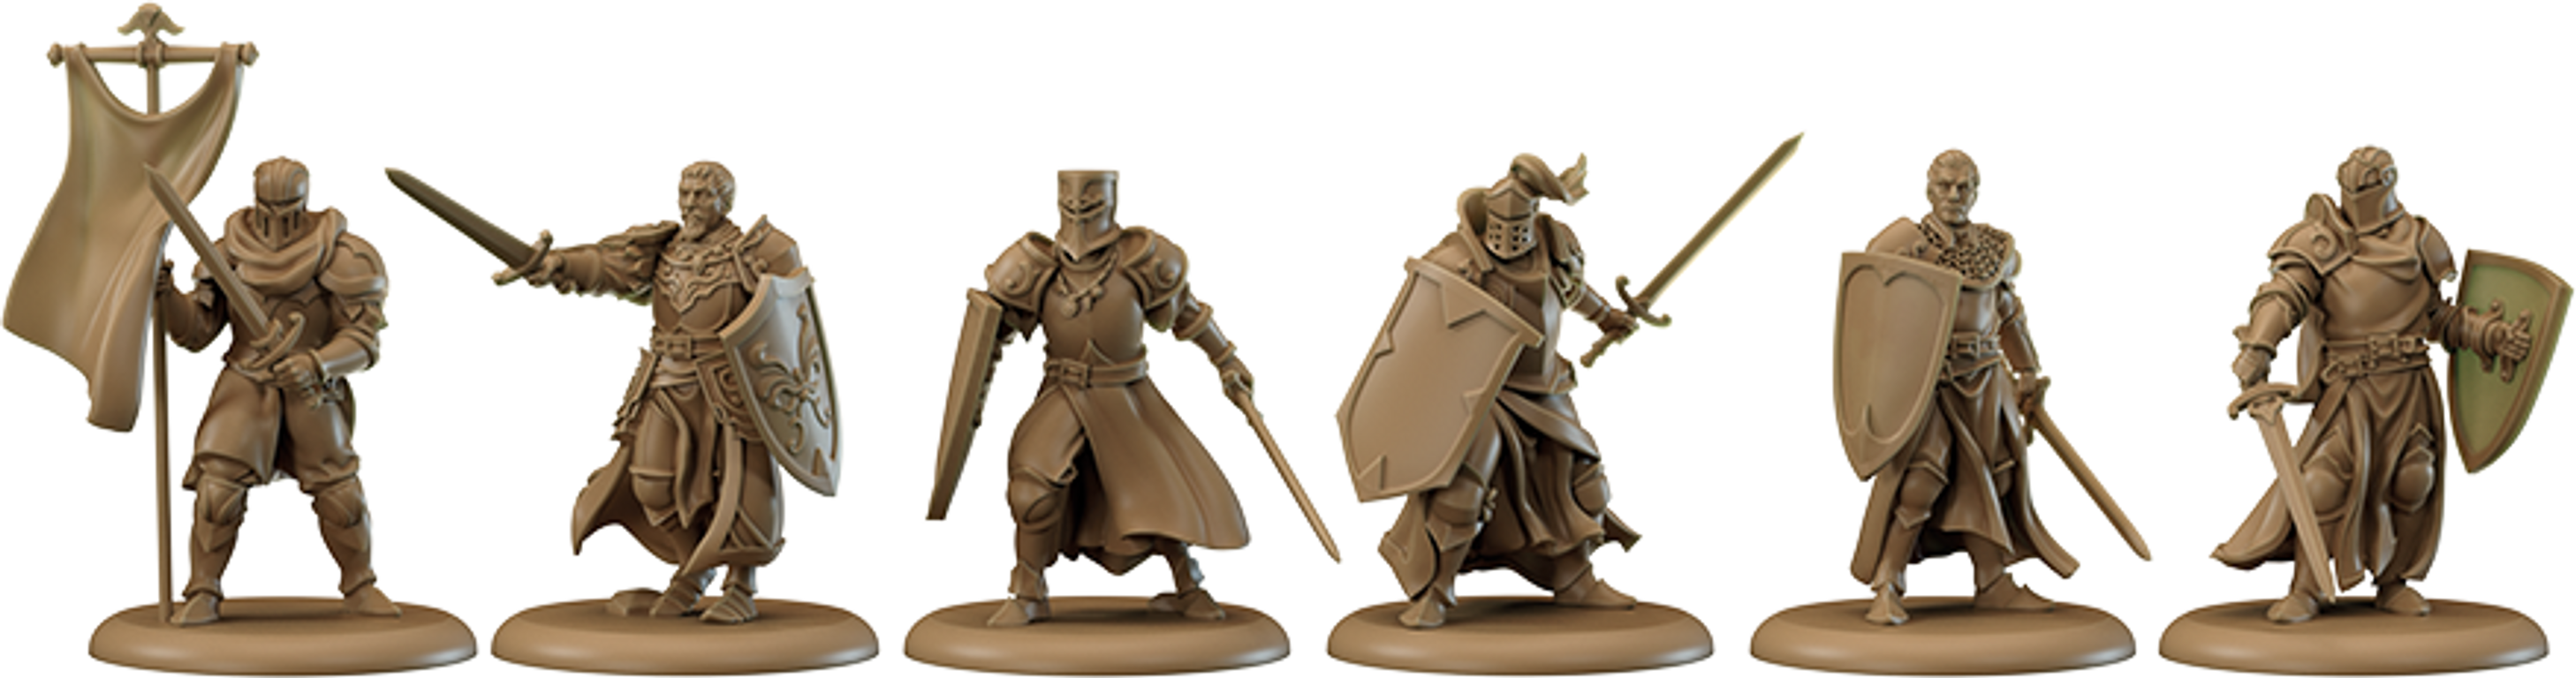 A Song of Ice & Fire: Tabletop Miniatures Game – Golden Company Swordsmen miniatures